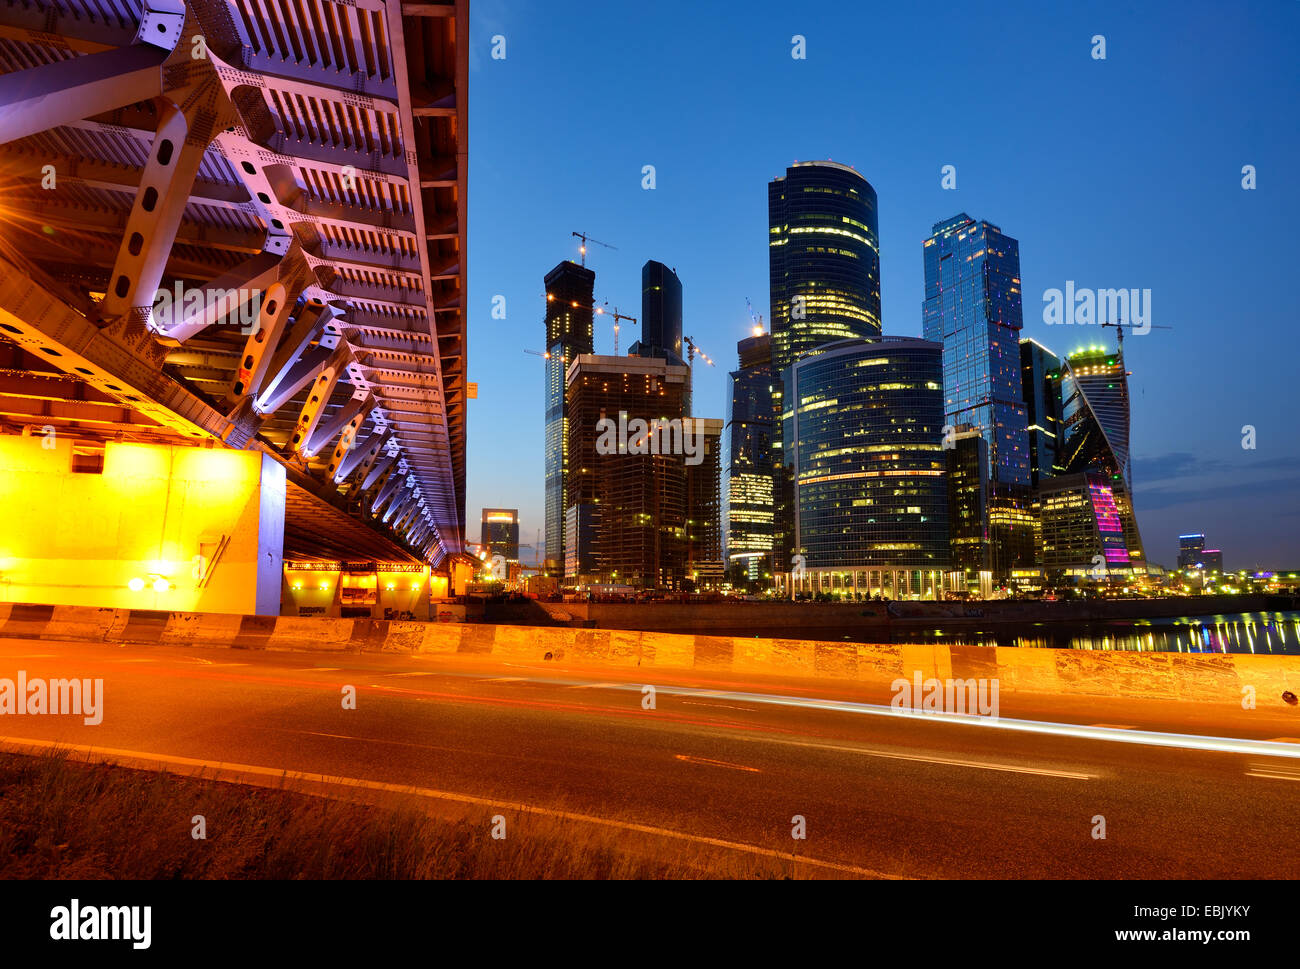 View of skyscrapers et Dorogomilovsky bridge at night, Moscow, Russie Banque D'Images